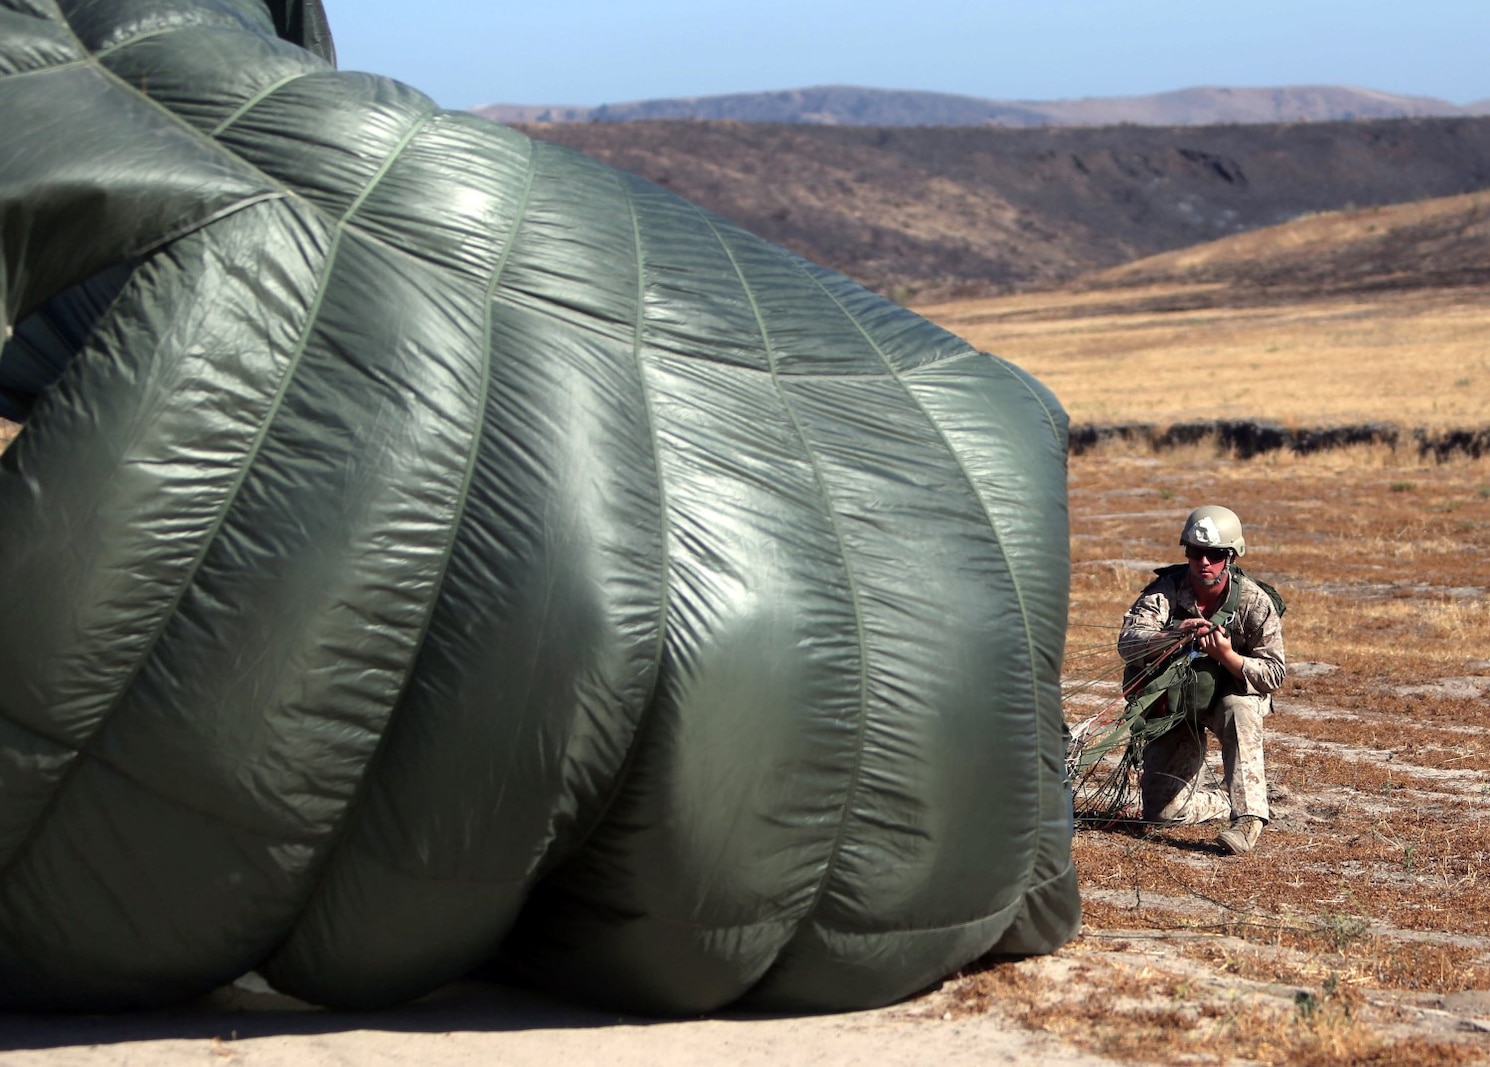 A Marine with Company C, 1st Reconnaissance Battalion, wrestles his parachute to the ground after landing from a static line jump aboard Marine Corps Base Camp Pendleton, Calif., June 25, 2014. The company practiced both freefall and static line jumps from a CH-43E helicopter to better prepare for potential combat operations anywhere they are needed worldwide.